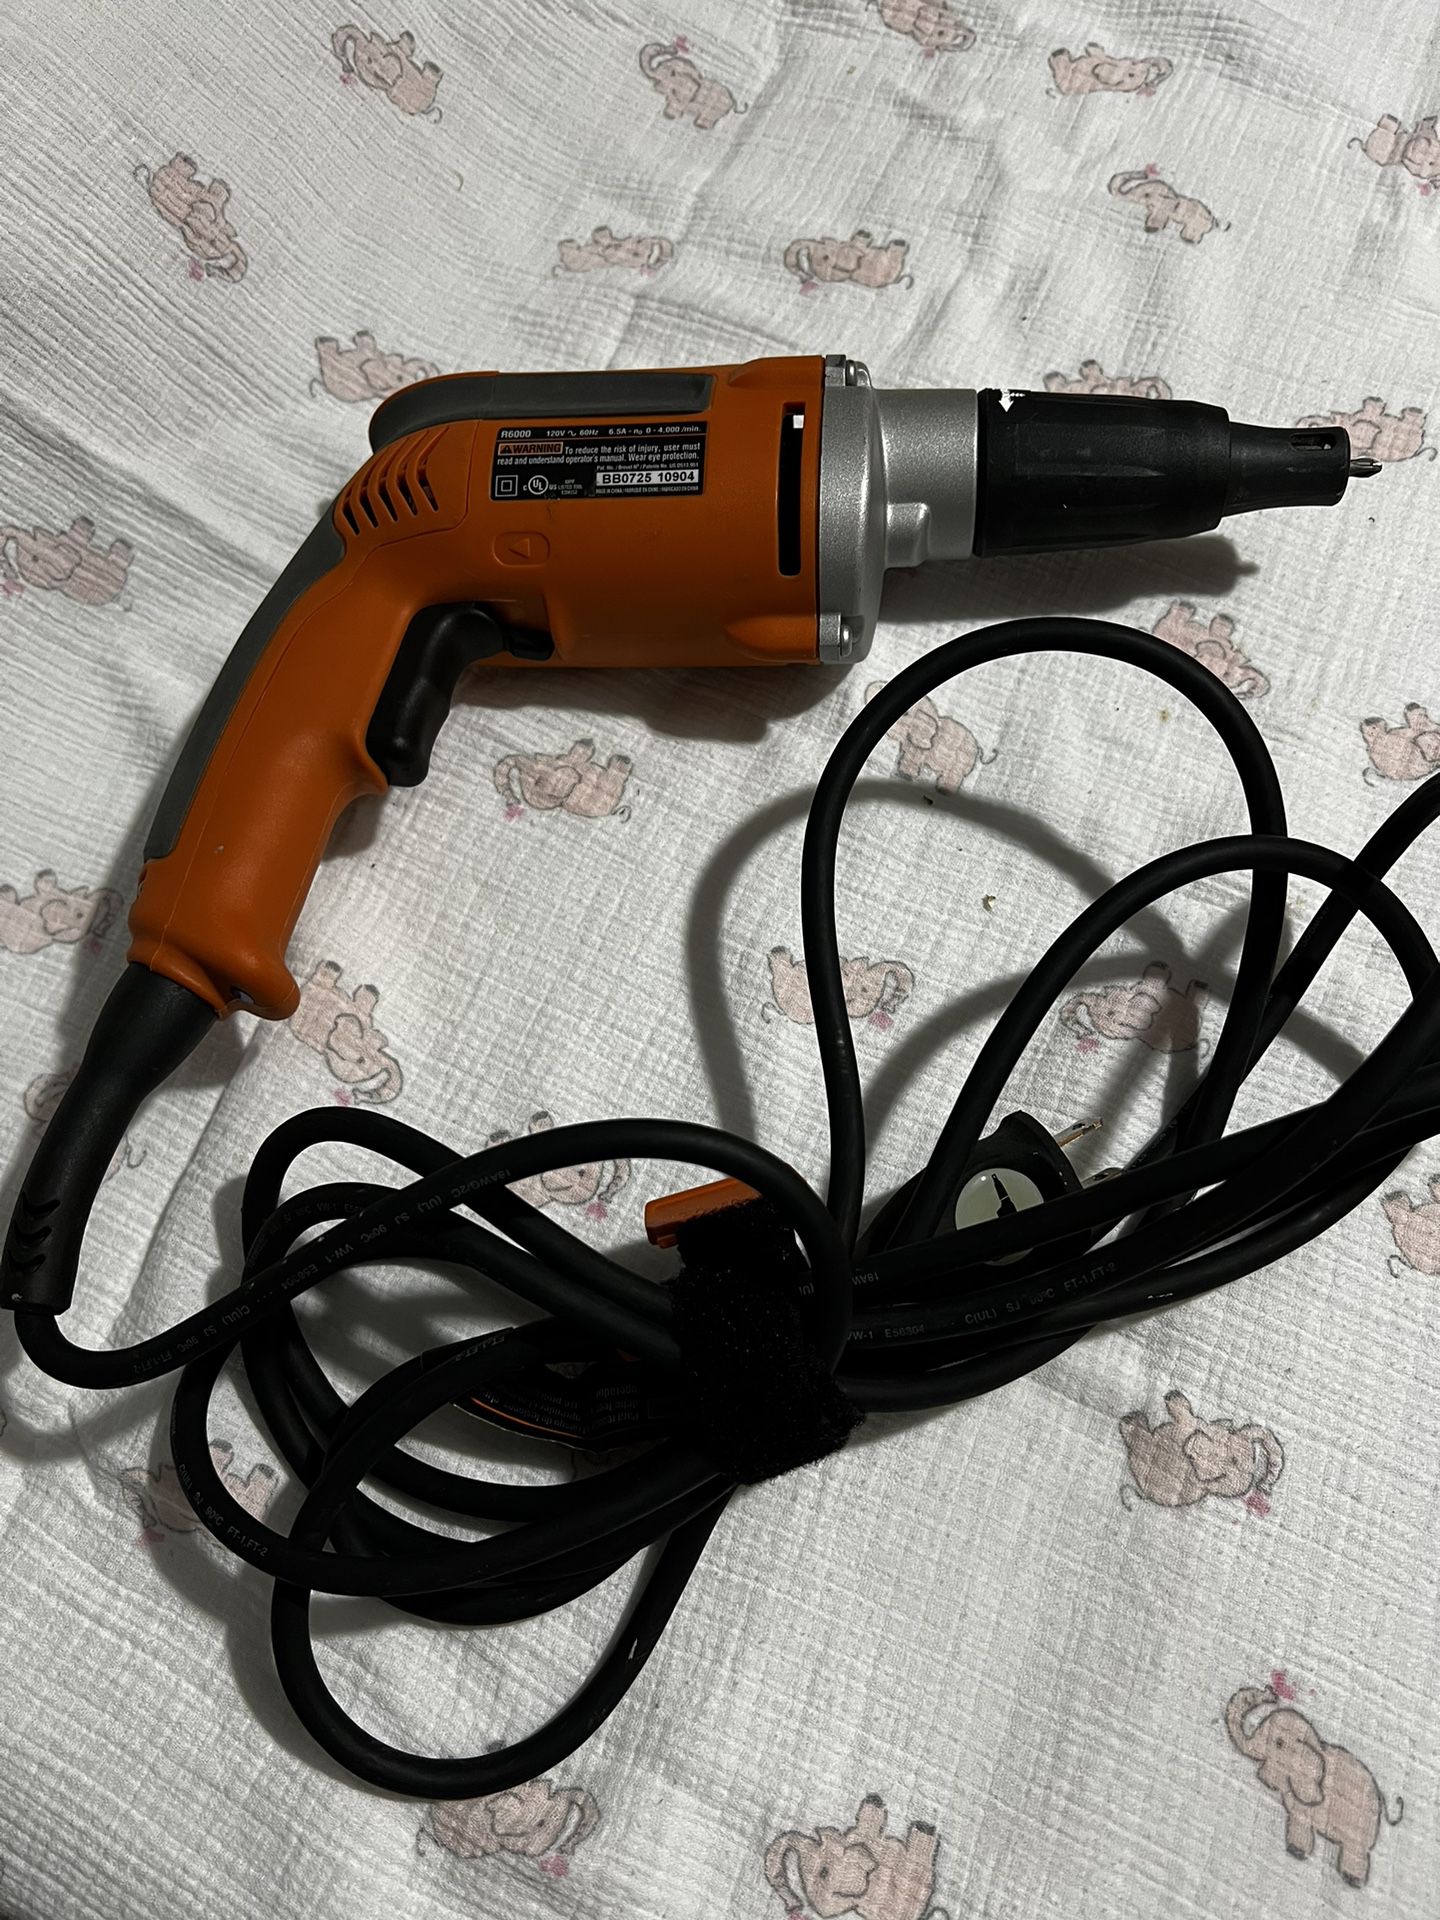 RIDGIT  R6000  DRYWALL SCREWDRIVER EXCELLENT CONDITION 